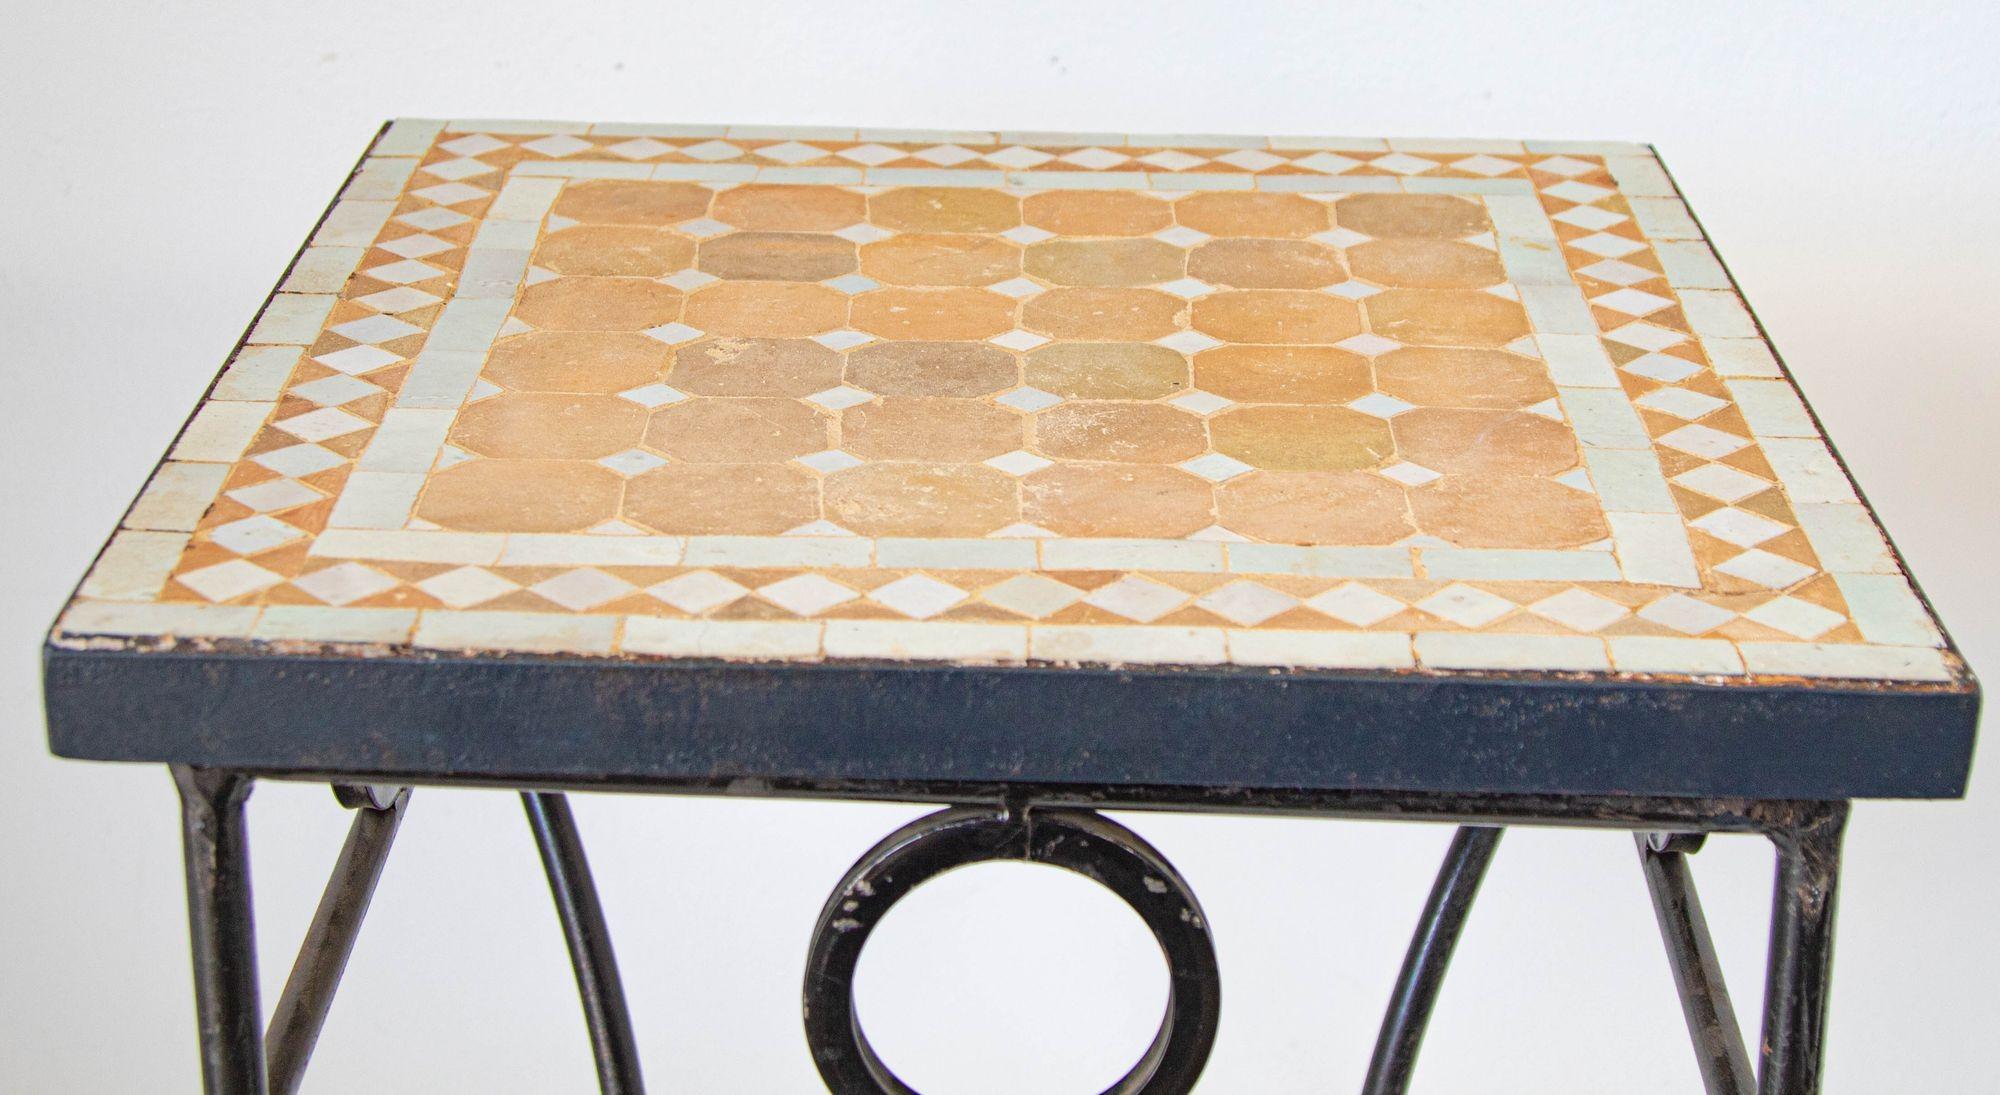 Hand-Crafted Vintage Moroccan Mosaic Outdoor Tile Table For Sale